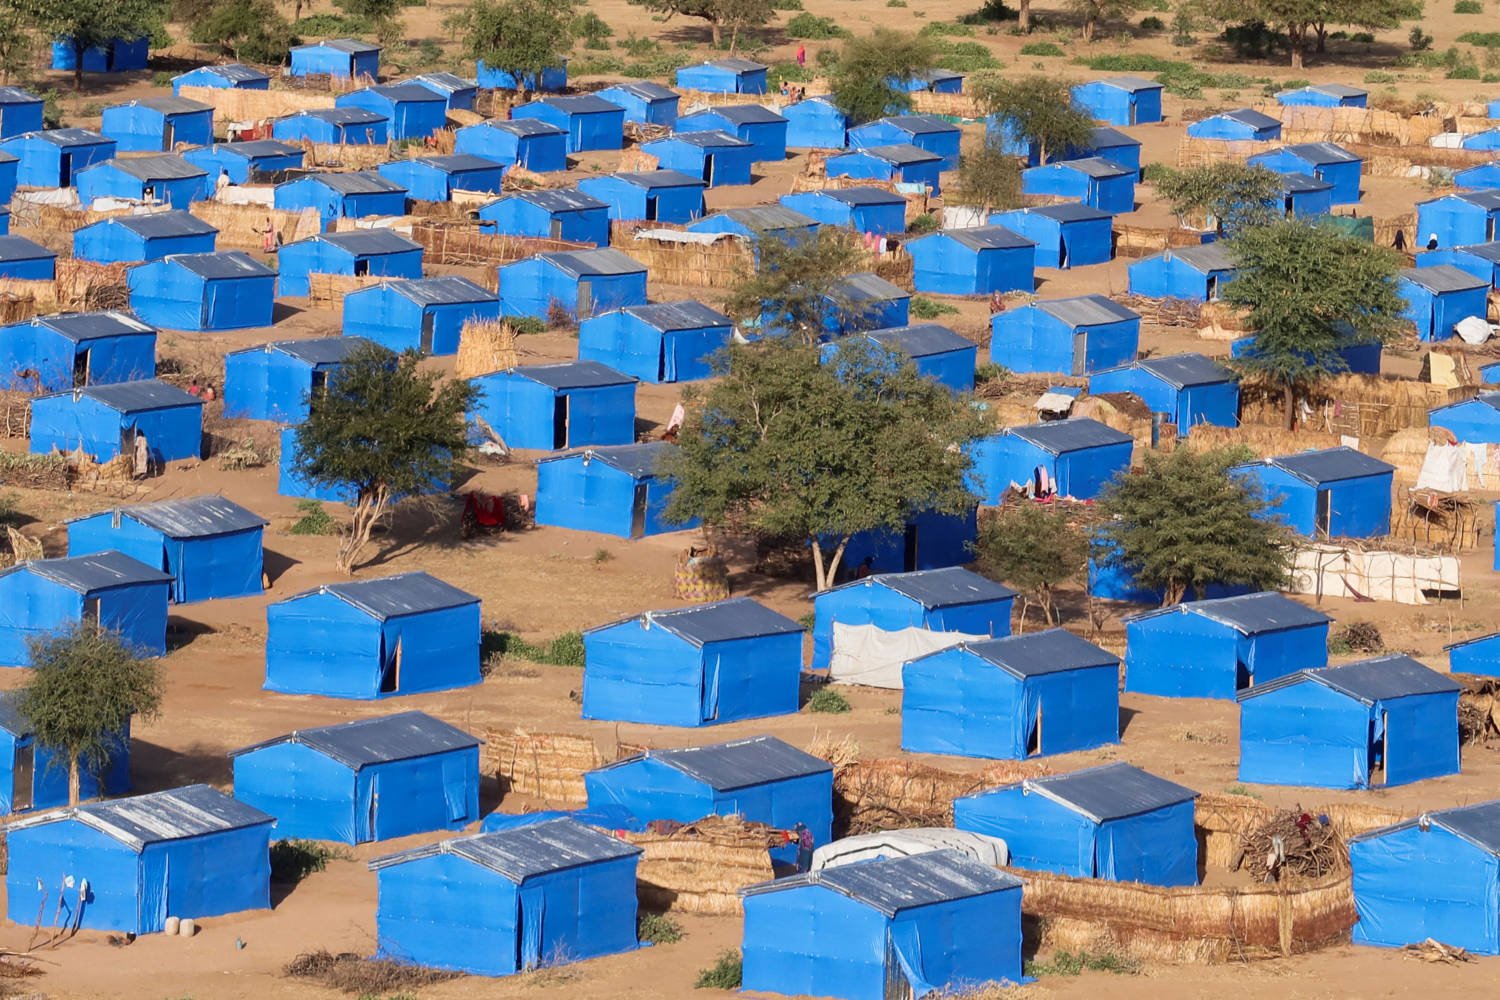 File Photo: A General View Of Refugee Tents In The Metche Sudanese Refugee Camp, Chad